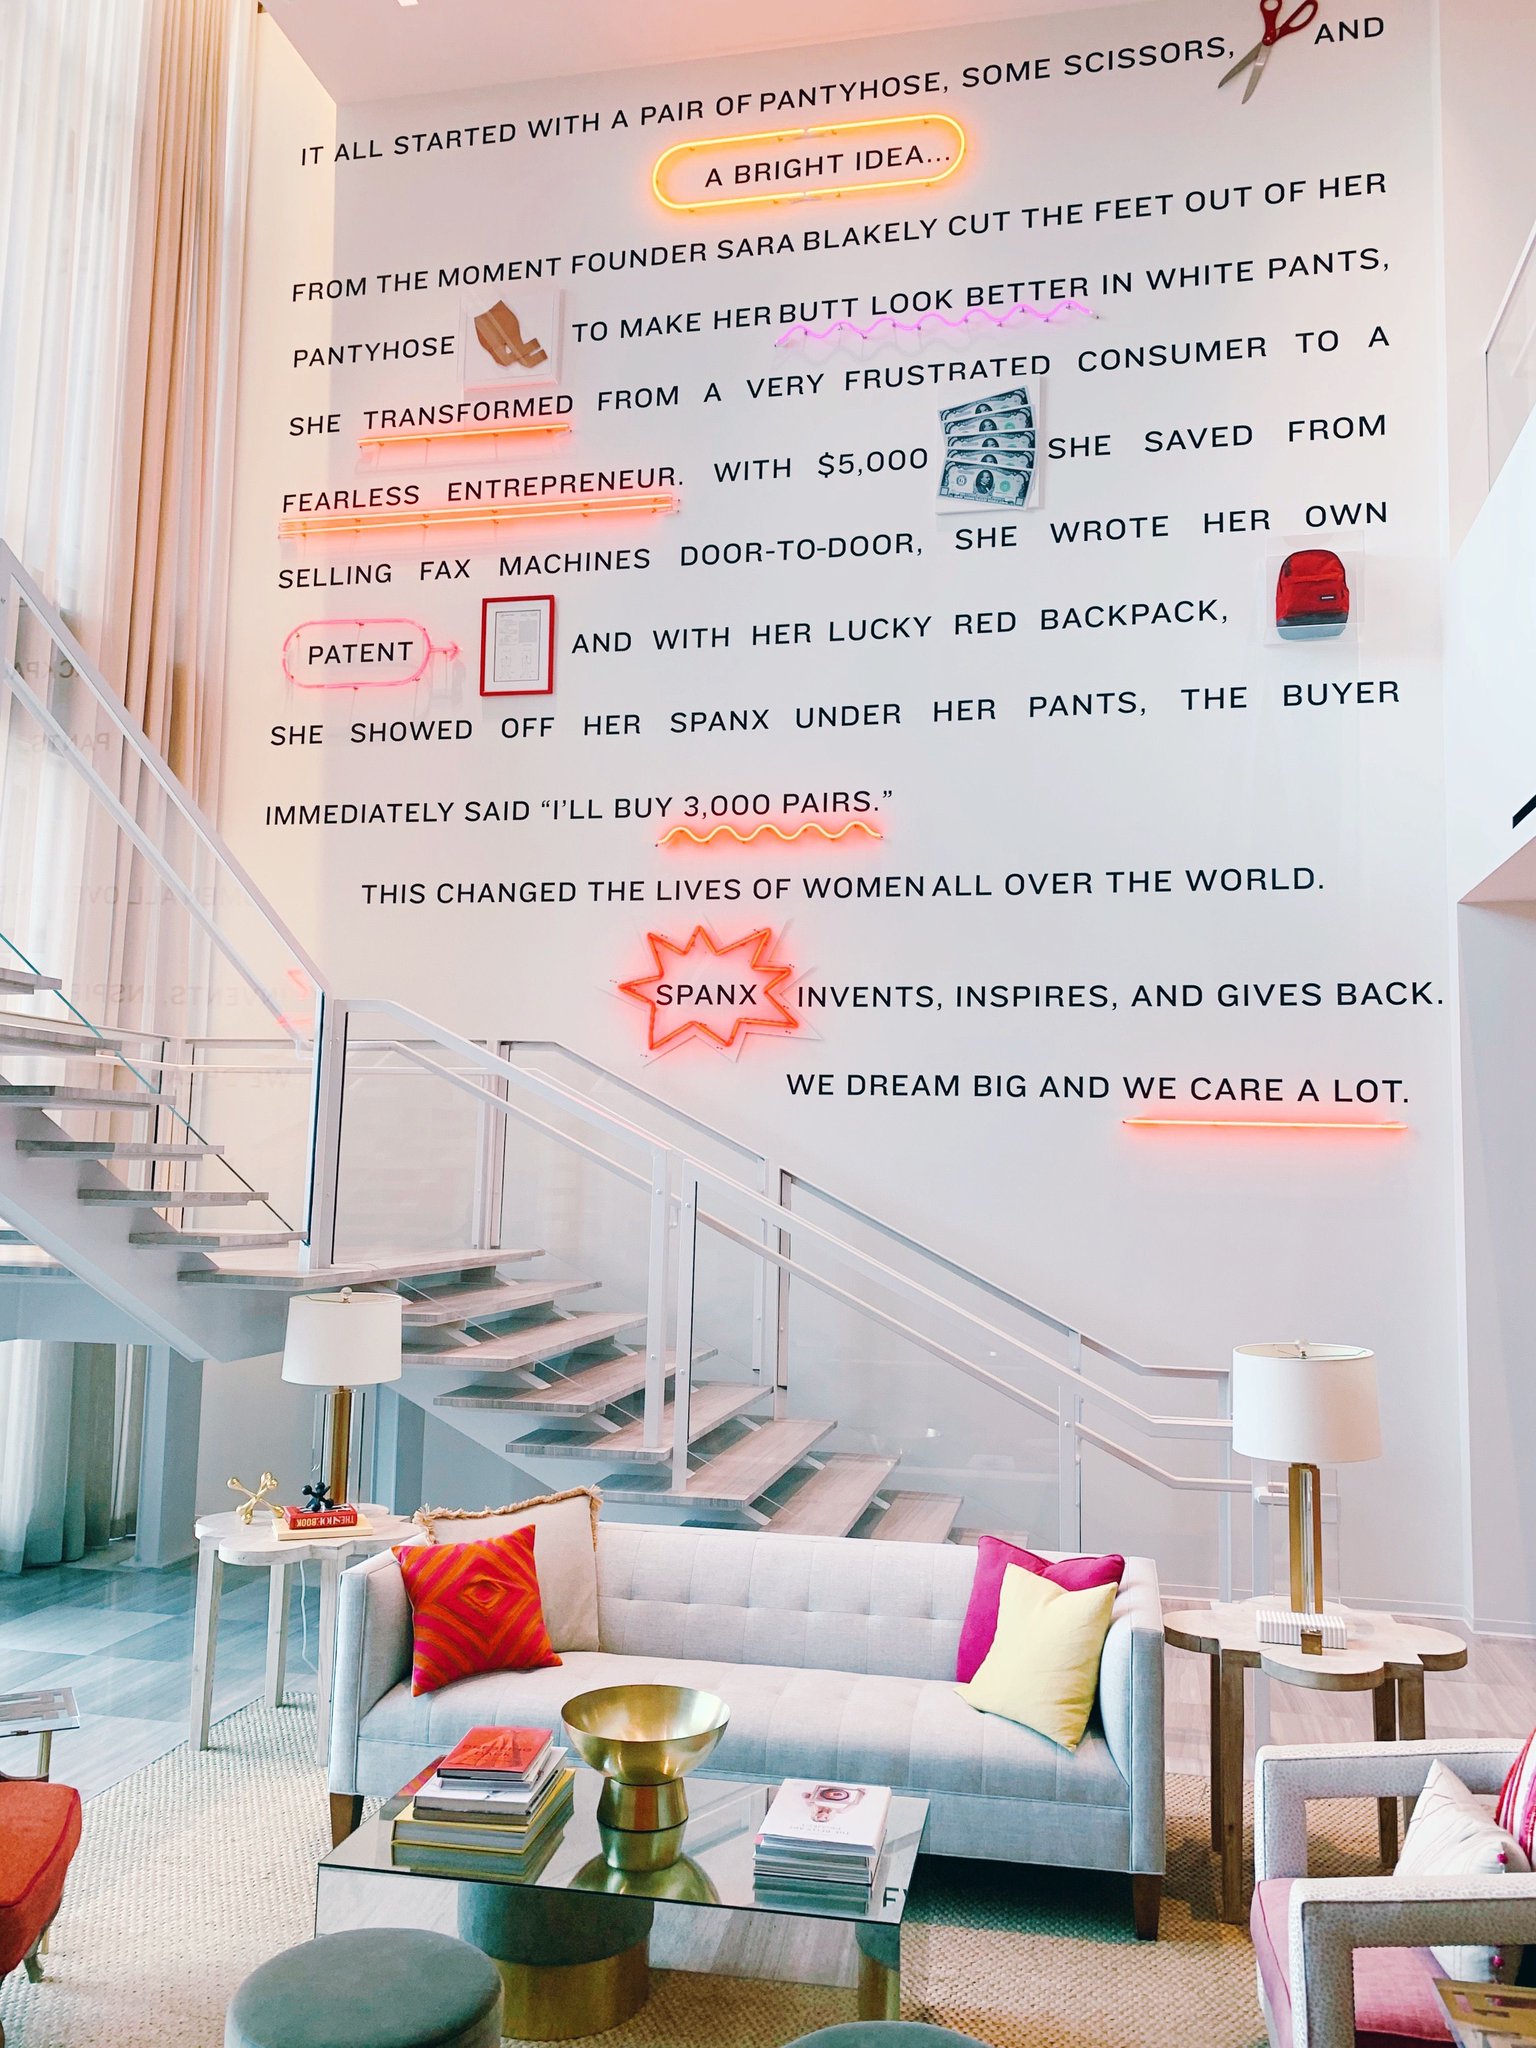 Welcome to the @Spanx HQ! 💥 This is the lobby at our home office